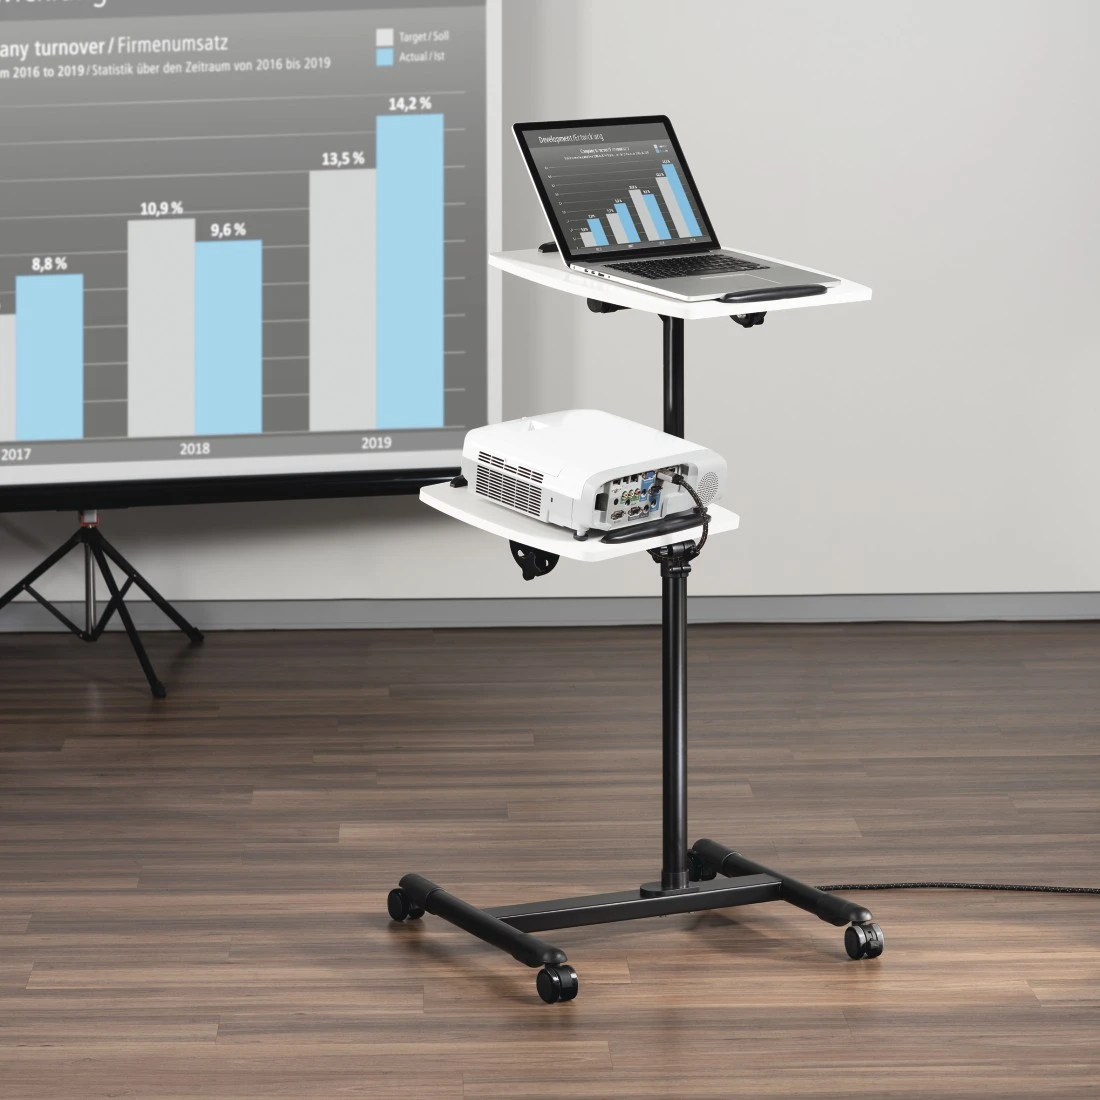 Hama 00077510 Projector Table with 2 Levels (42 x 50 / 40 x 35 cm), Height-Adjustable, wi